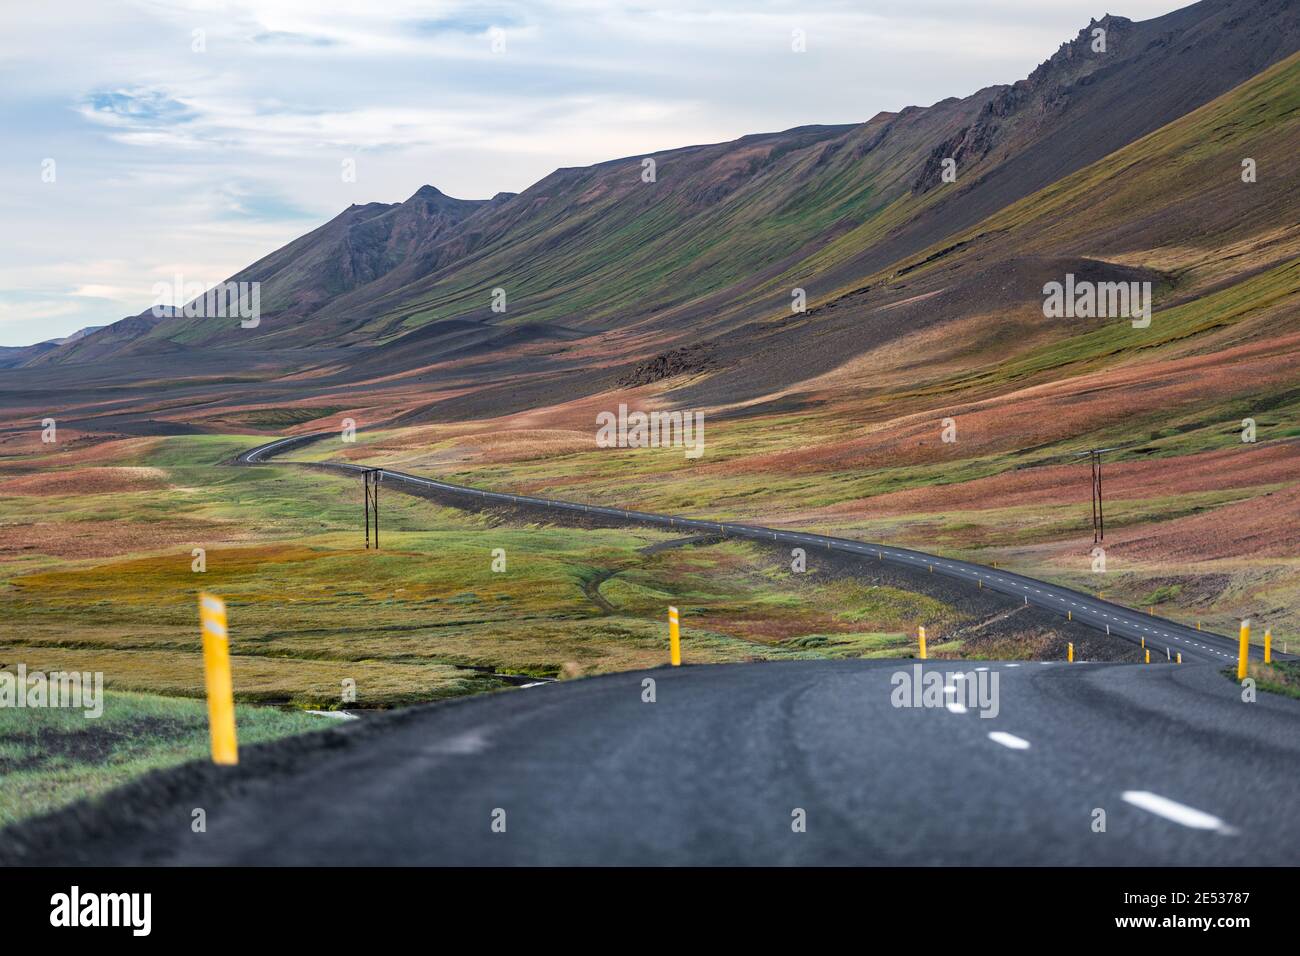 Icelandic landscape with a road snaking through a colorful sloping crested hill and a plain Stock Photo